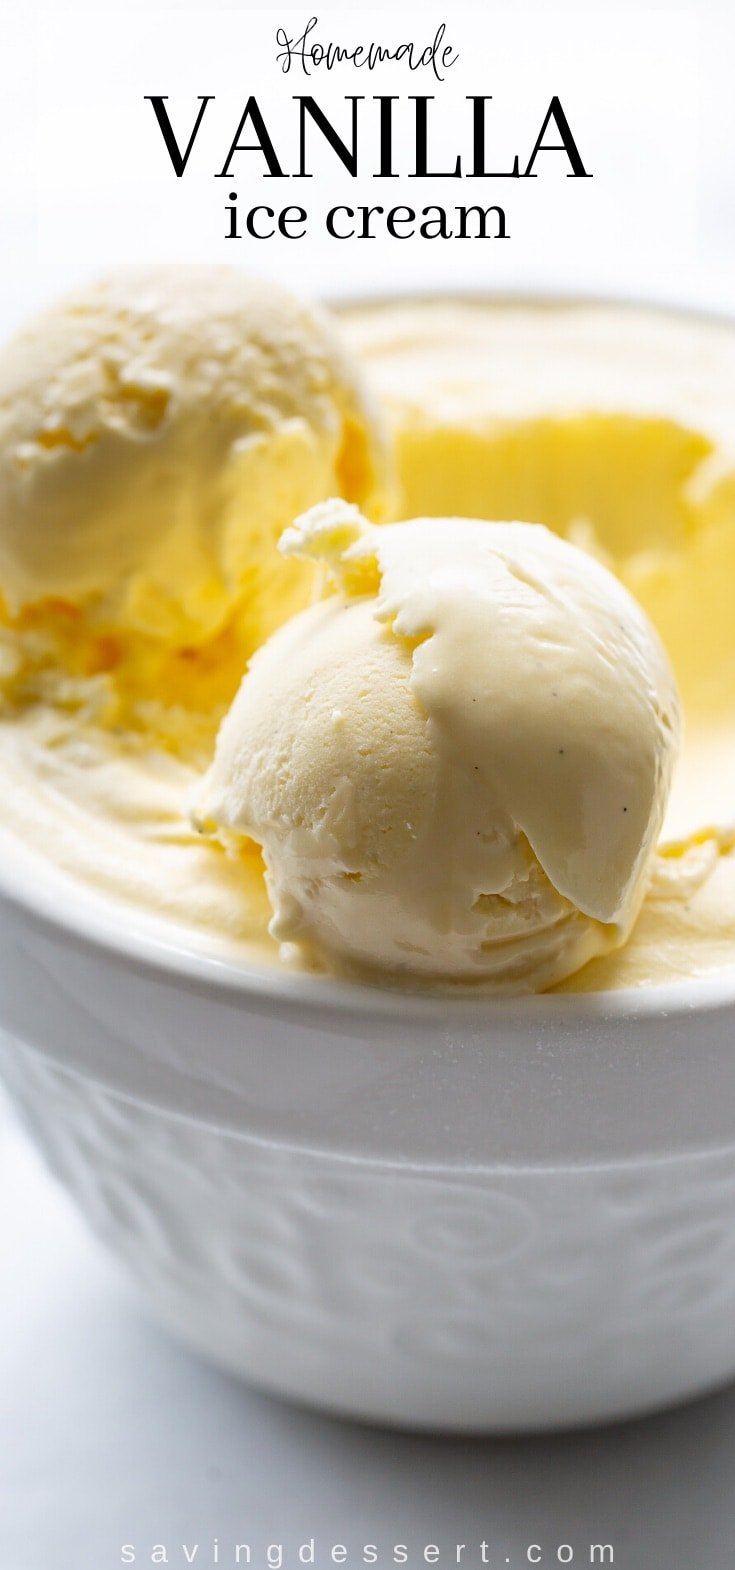 A closeup of a scoop of ice cream in a bowl